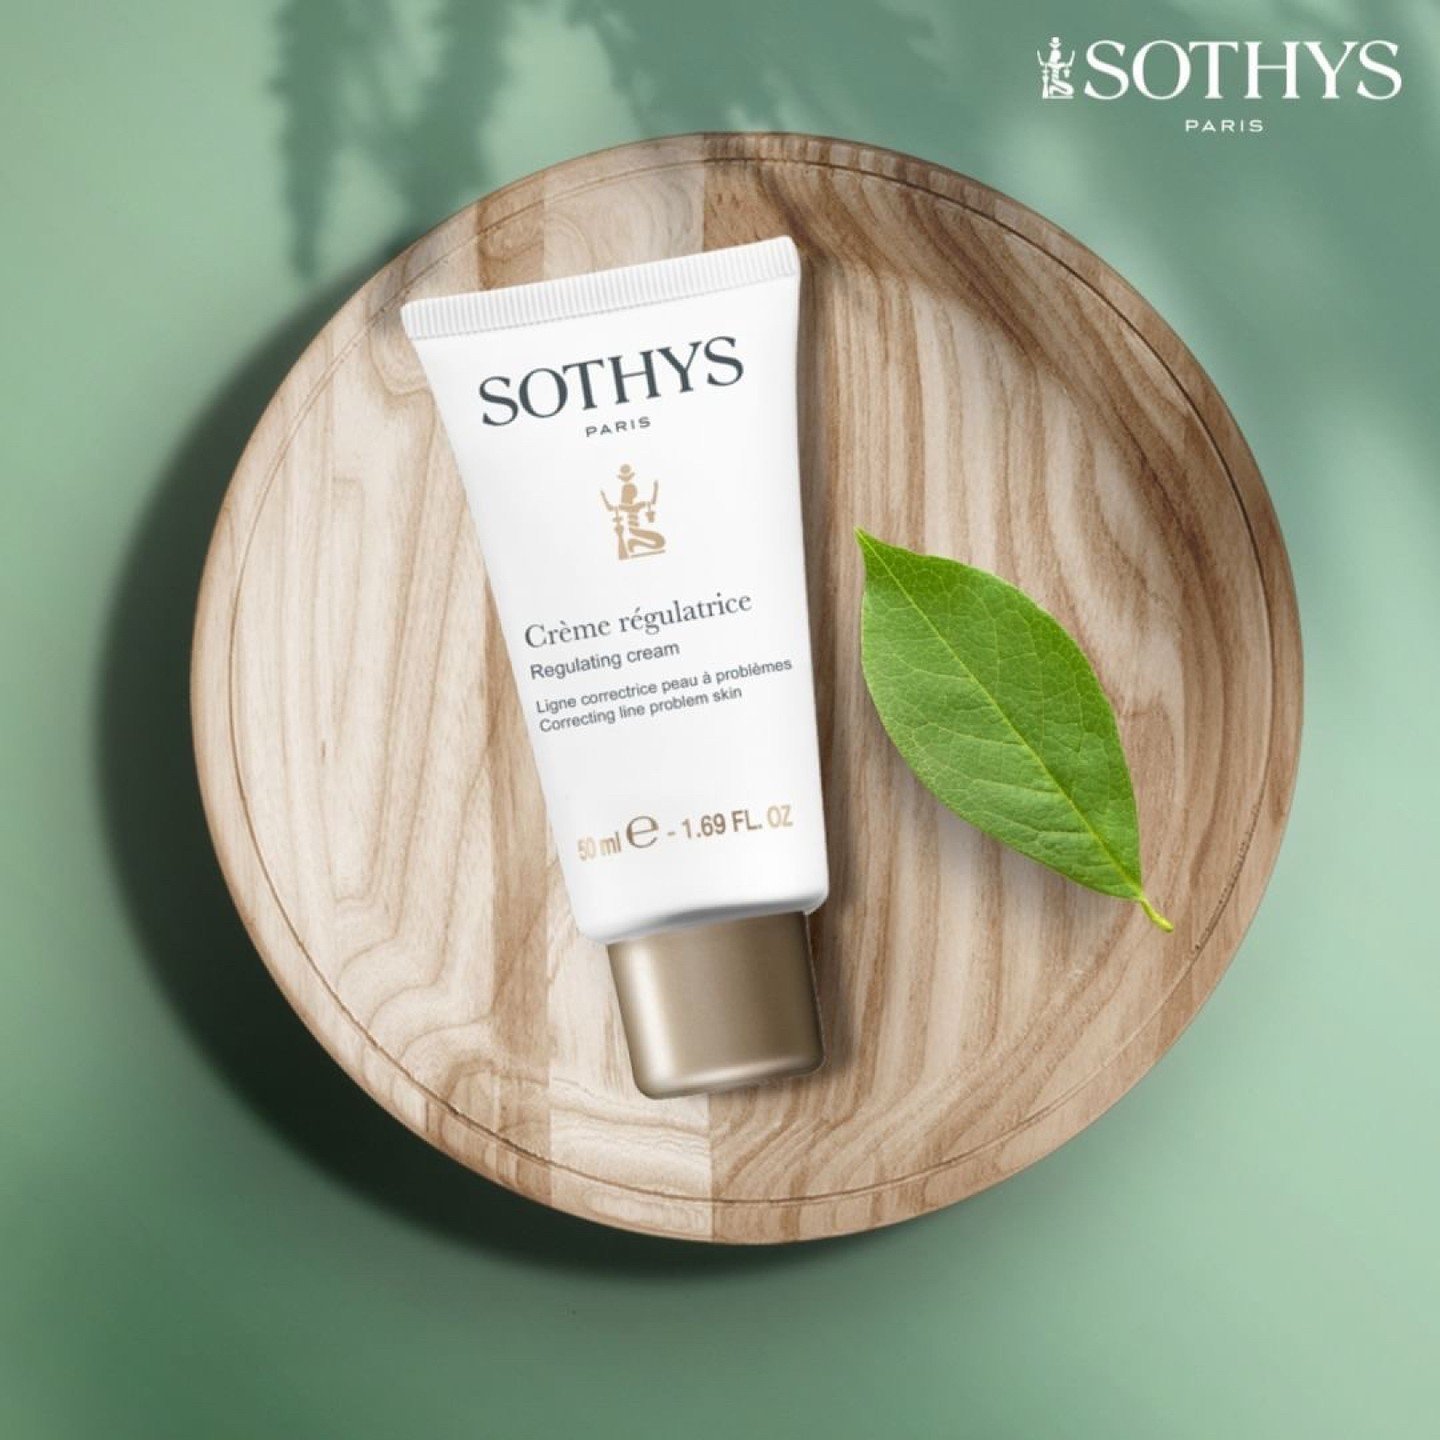 🌿The perfect solution for adults with problem skins and skins with imperfections....
SOTHYS Regulating Cream - A light-textured anti-inflammatory, repairing cream with active ingredients to digest hardened lumps, regulate oil flow, and unblock folli